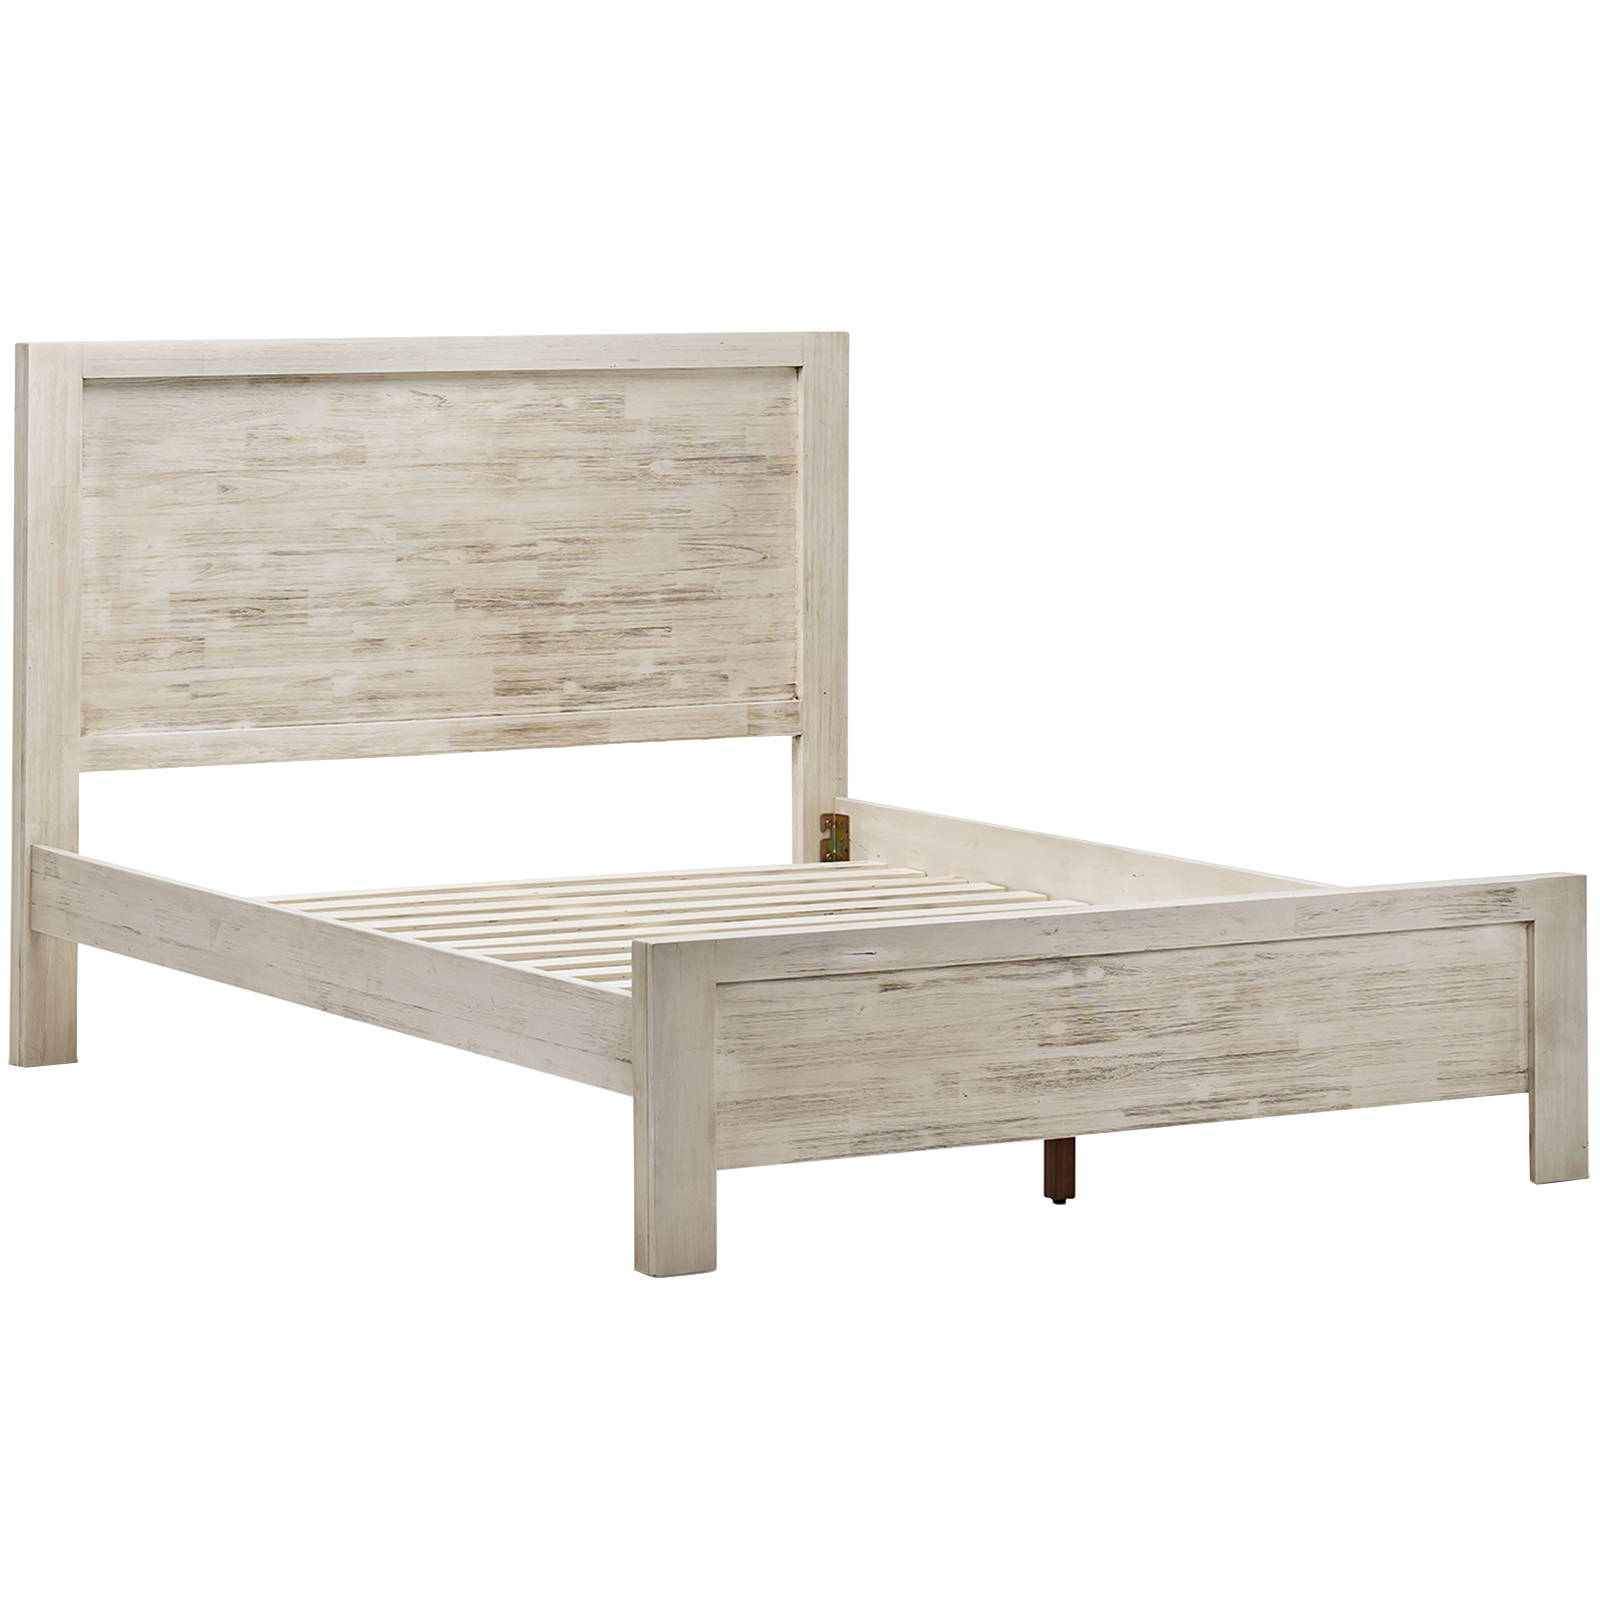 NEW White Wash Arya Acacia Wood Queen Bed Frame - Continental Designs ...